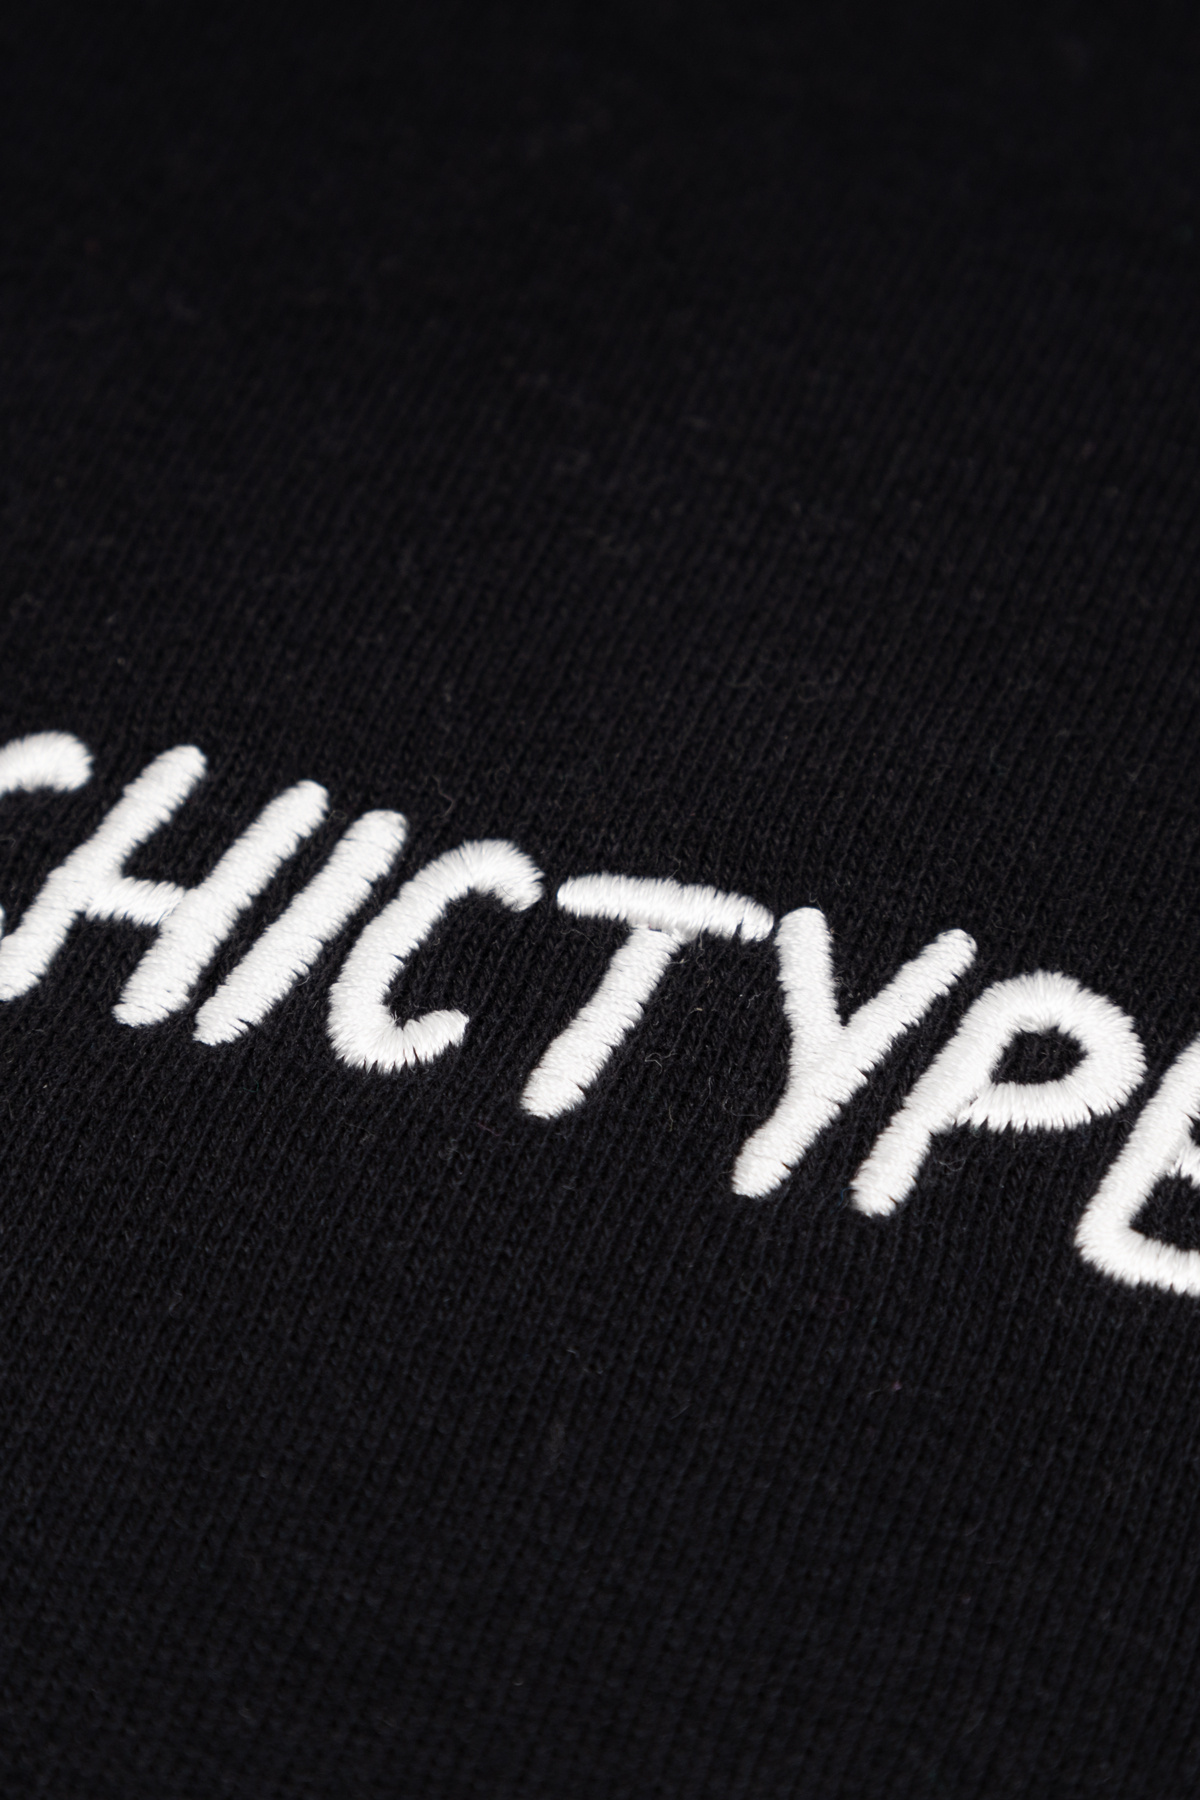 Sweat CHICTYPE Embroidery